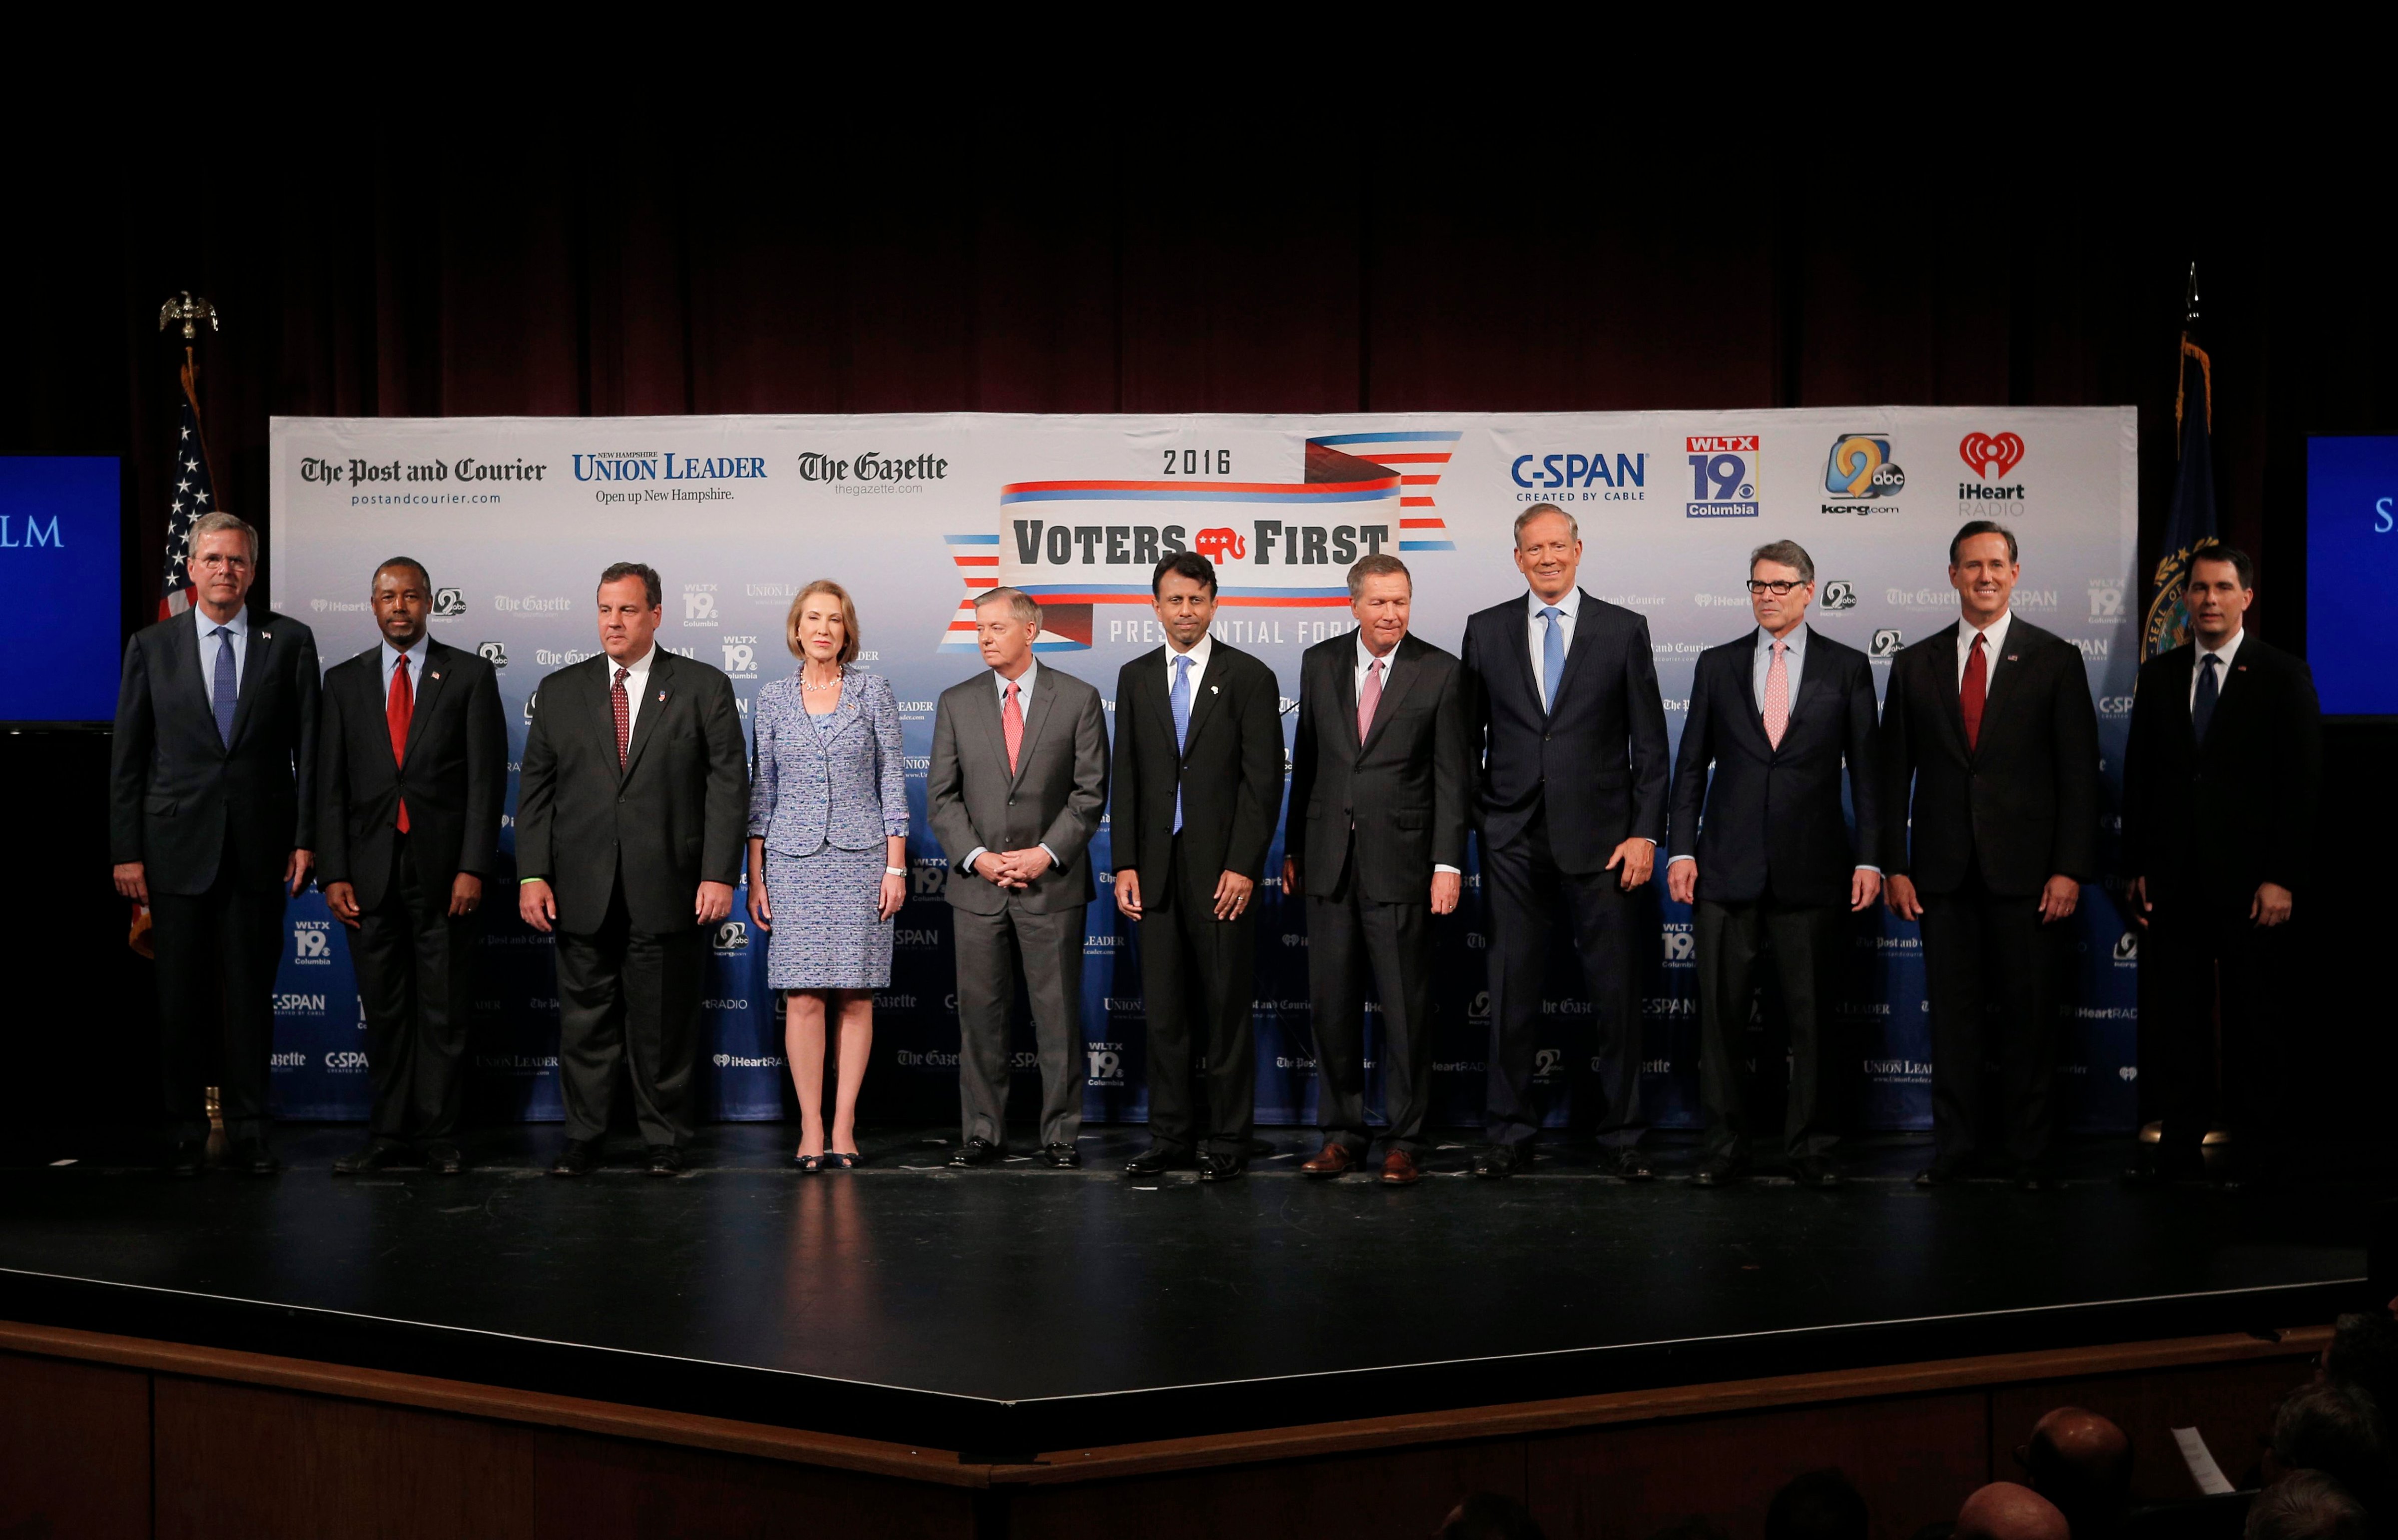 Eleven of the declared 2016 Republican U.S. presidential candidates pose together on stage before the start of the the Voters First Presidential Forum in Manchester, New Hampshire, August 3, 2015. (Brian Snyder—Reuters)